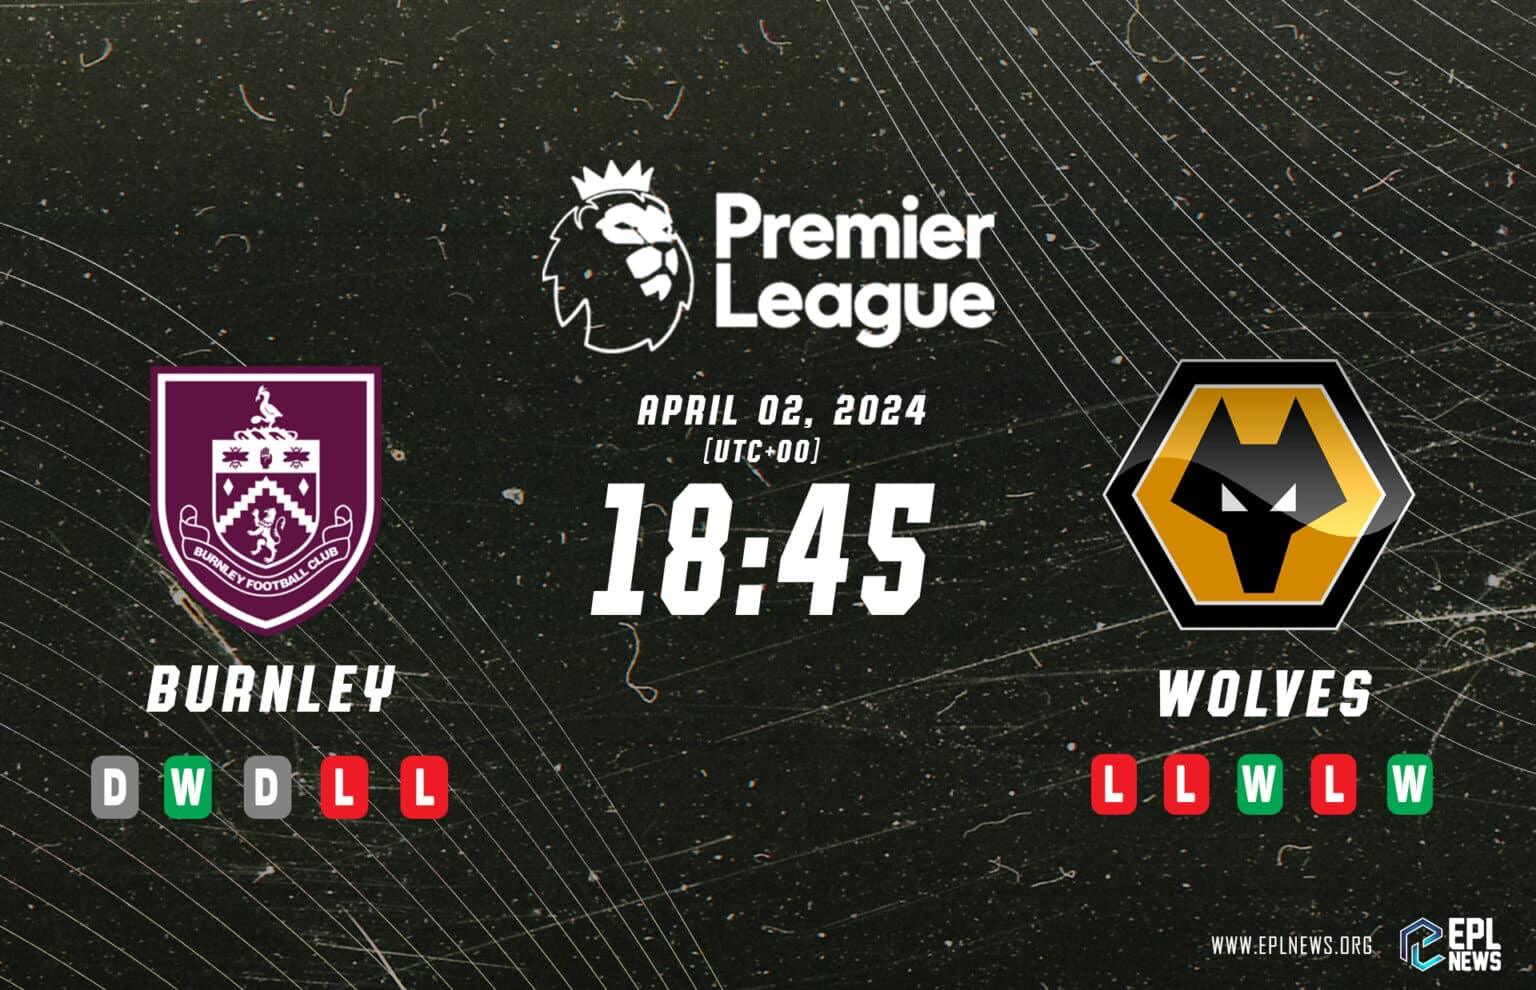 Burnley vs Wolves Match Preview- Is the Great Escape On at Turf Moor